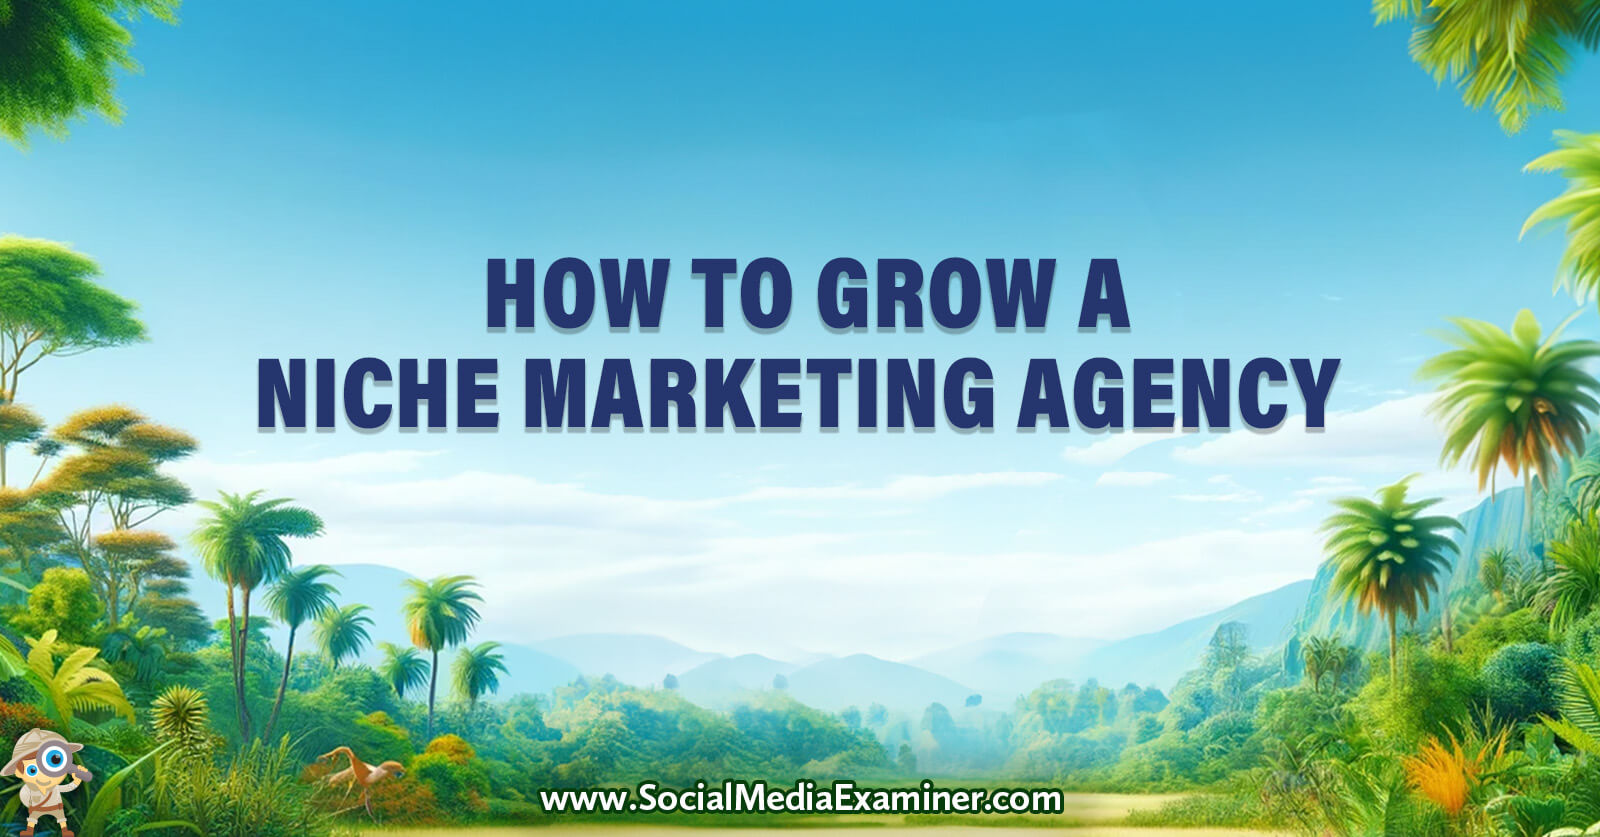 How to Grow a Niche Marketing Agency by Social Media Examiner